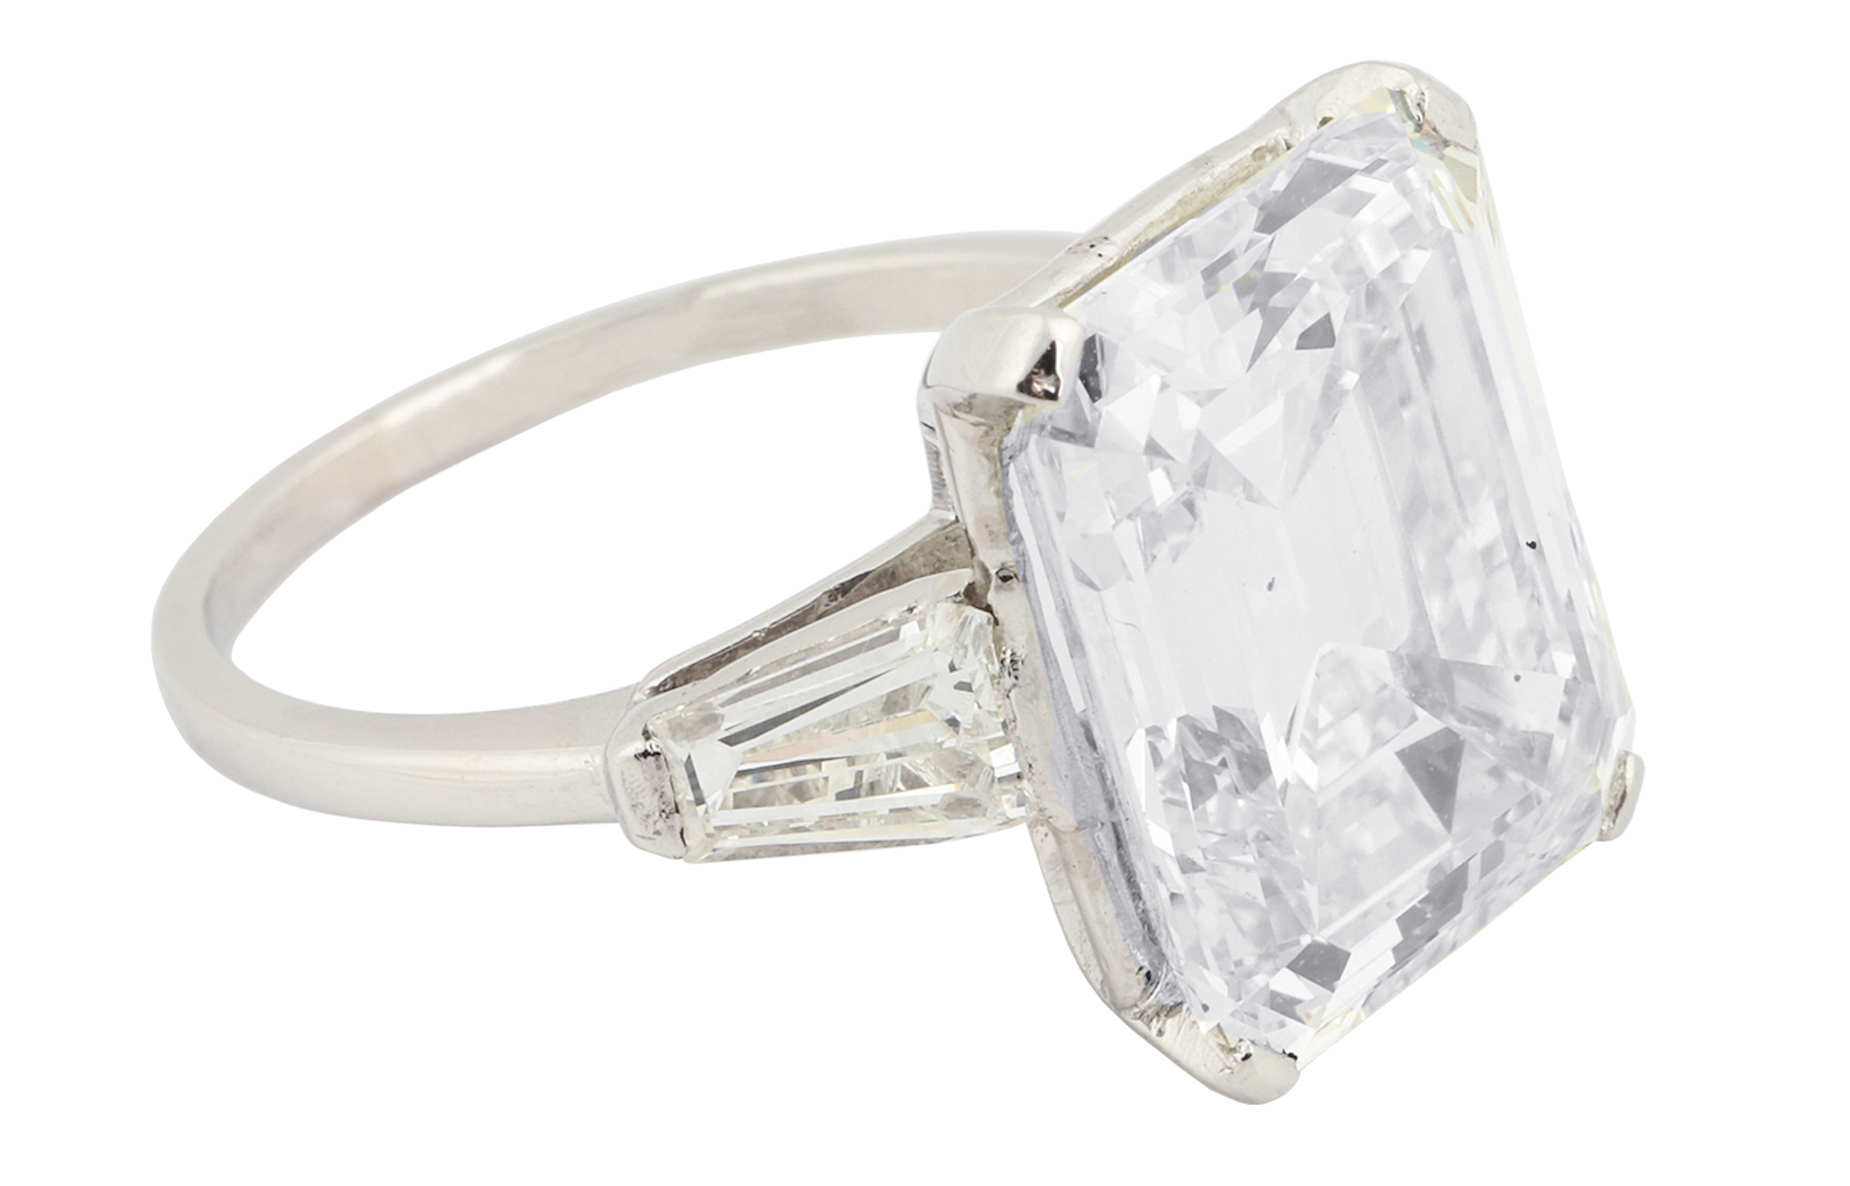 Diamond ring shone brightest at Miller & Miller's watches and jewelry sale